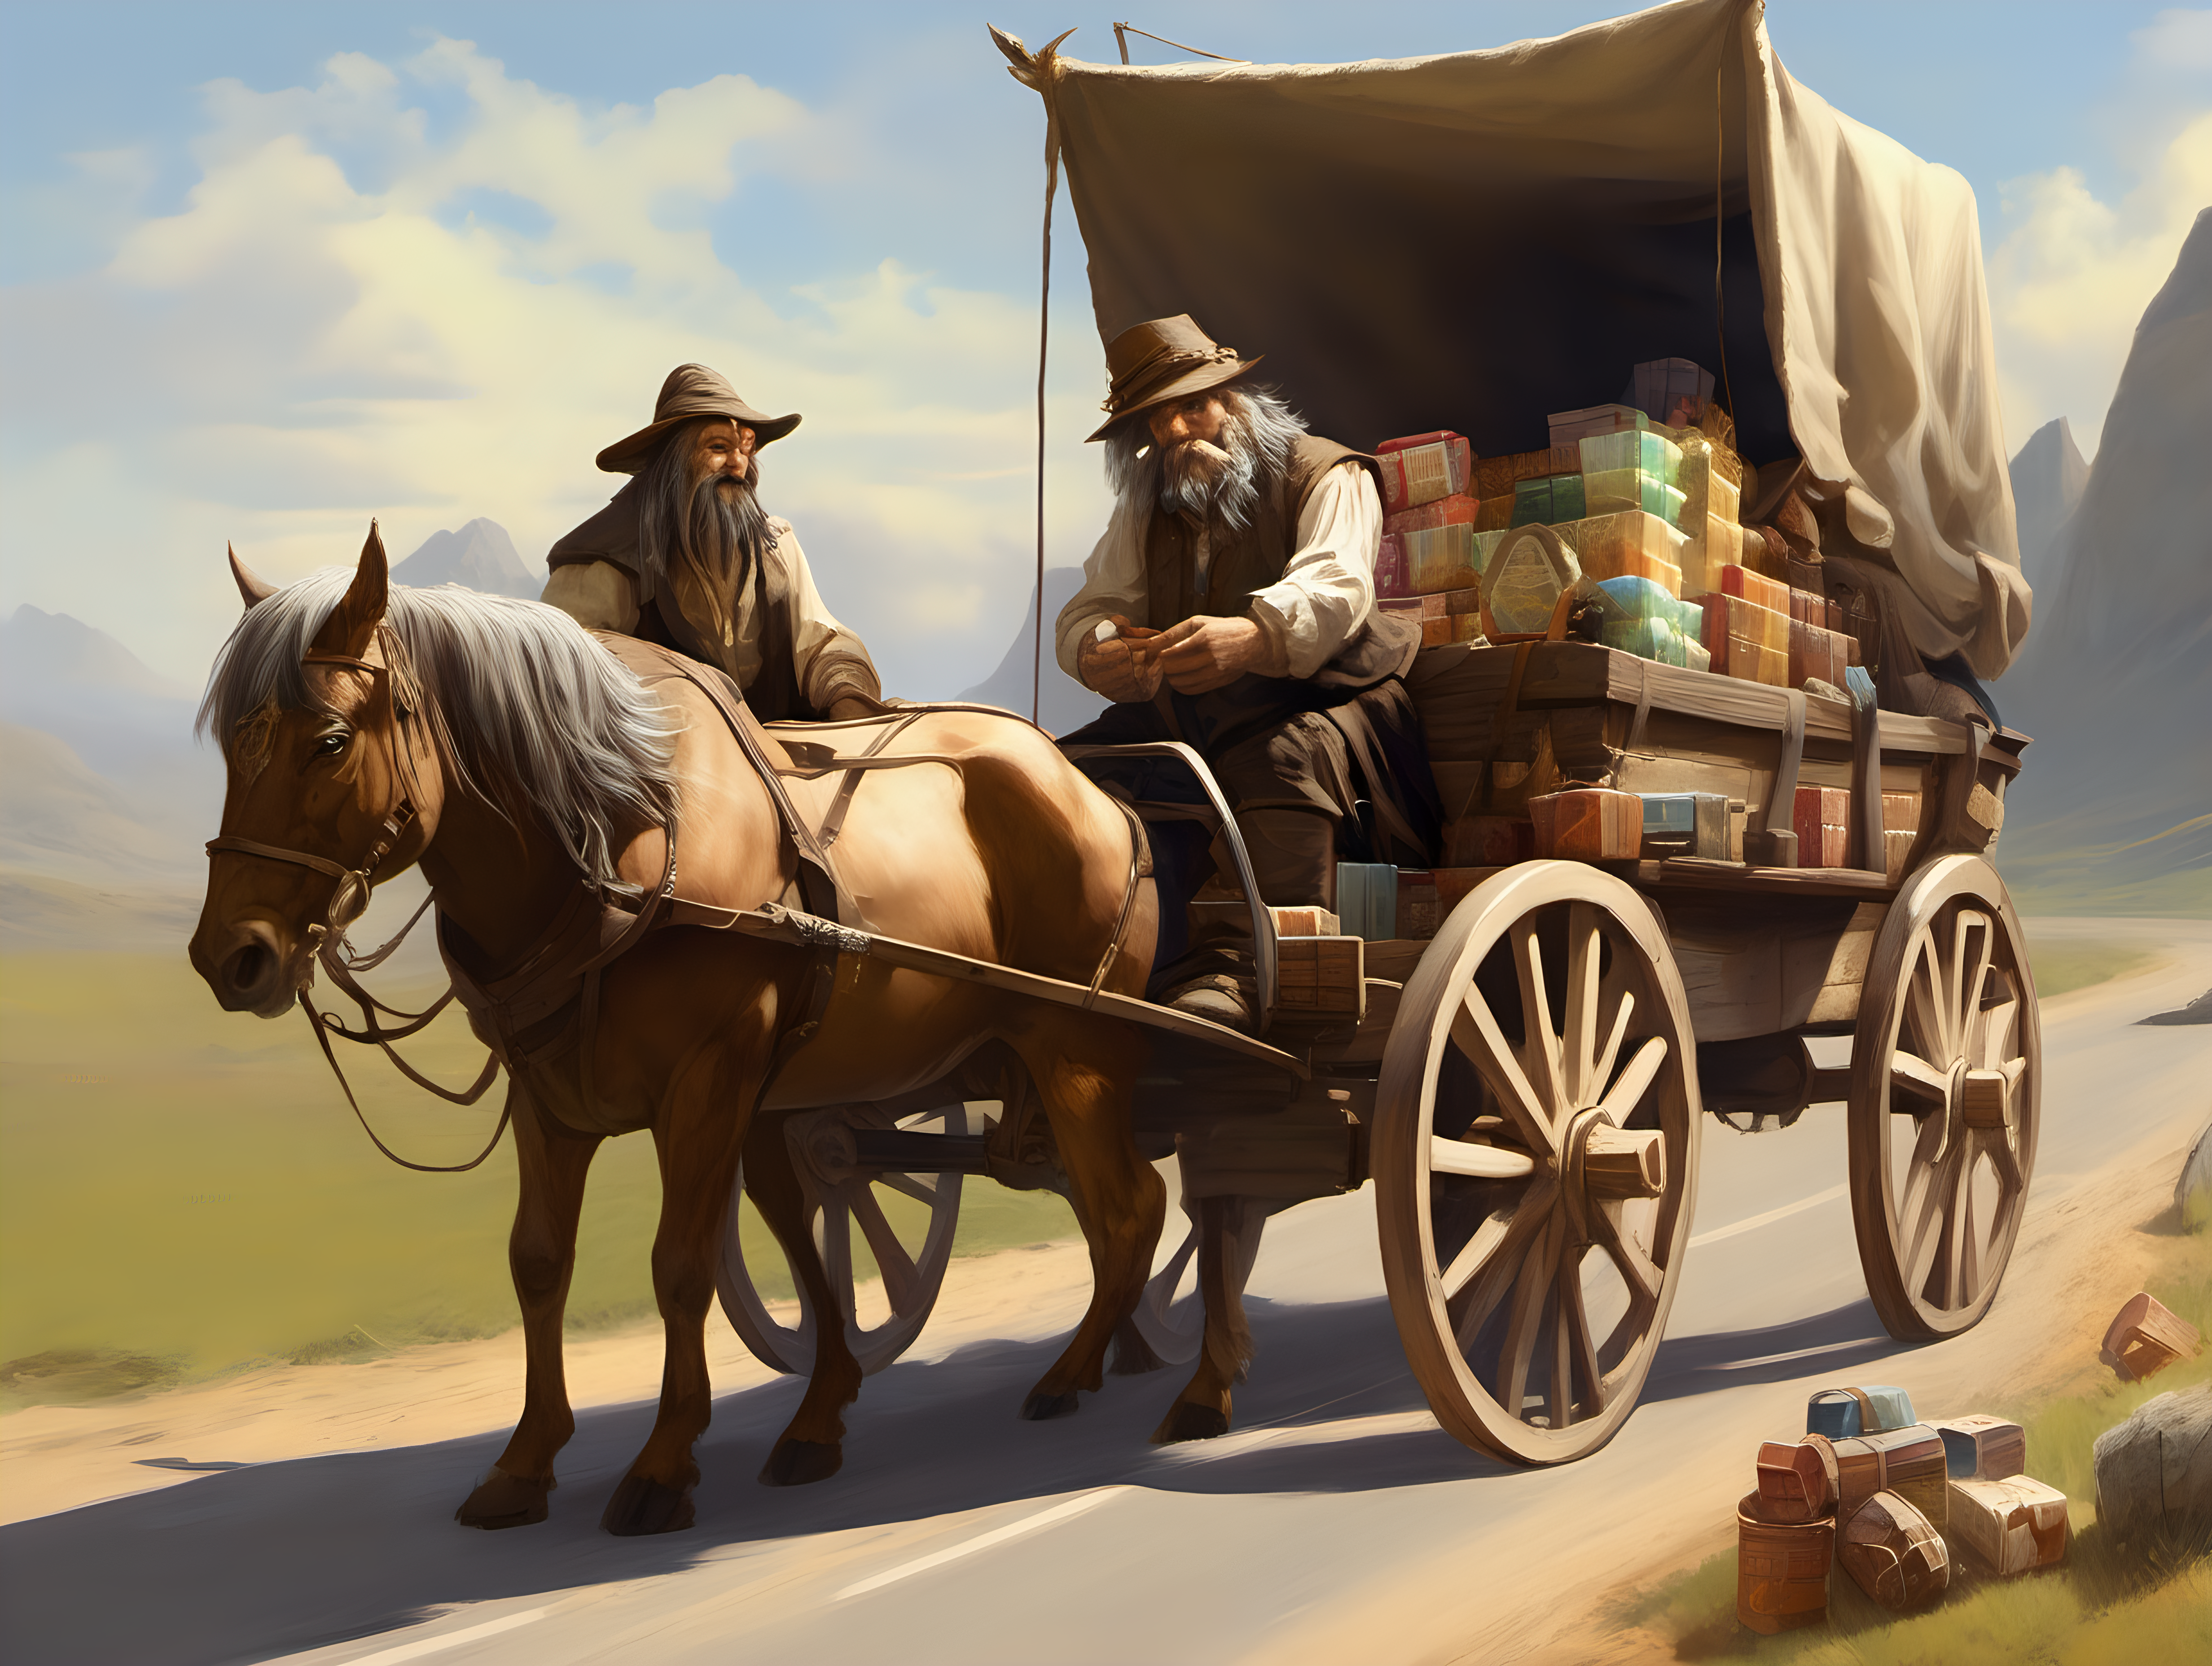 Fantasy Trader and customer on the road by his wagon